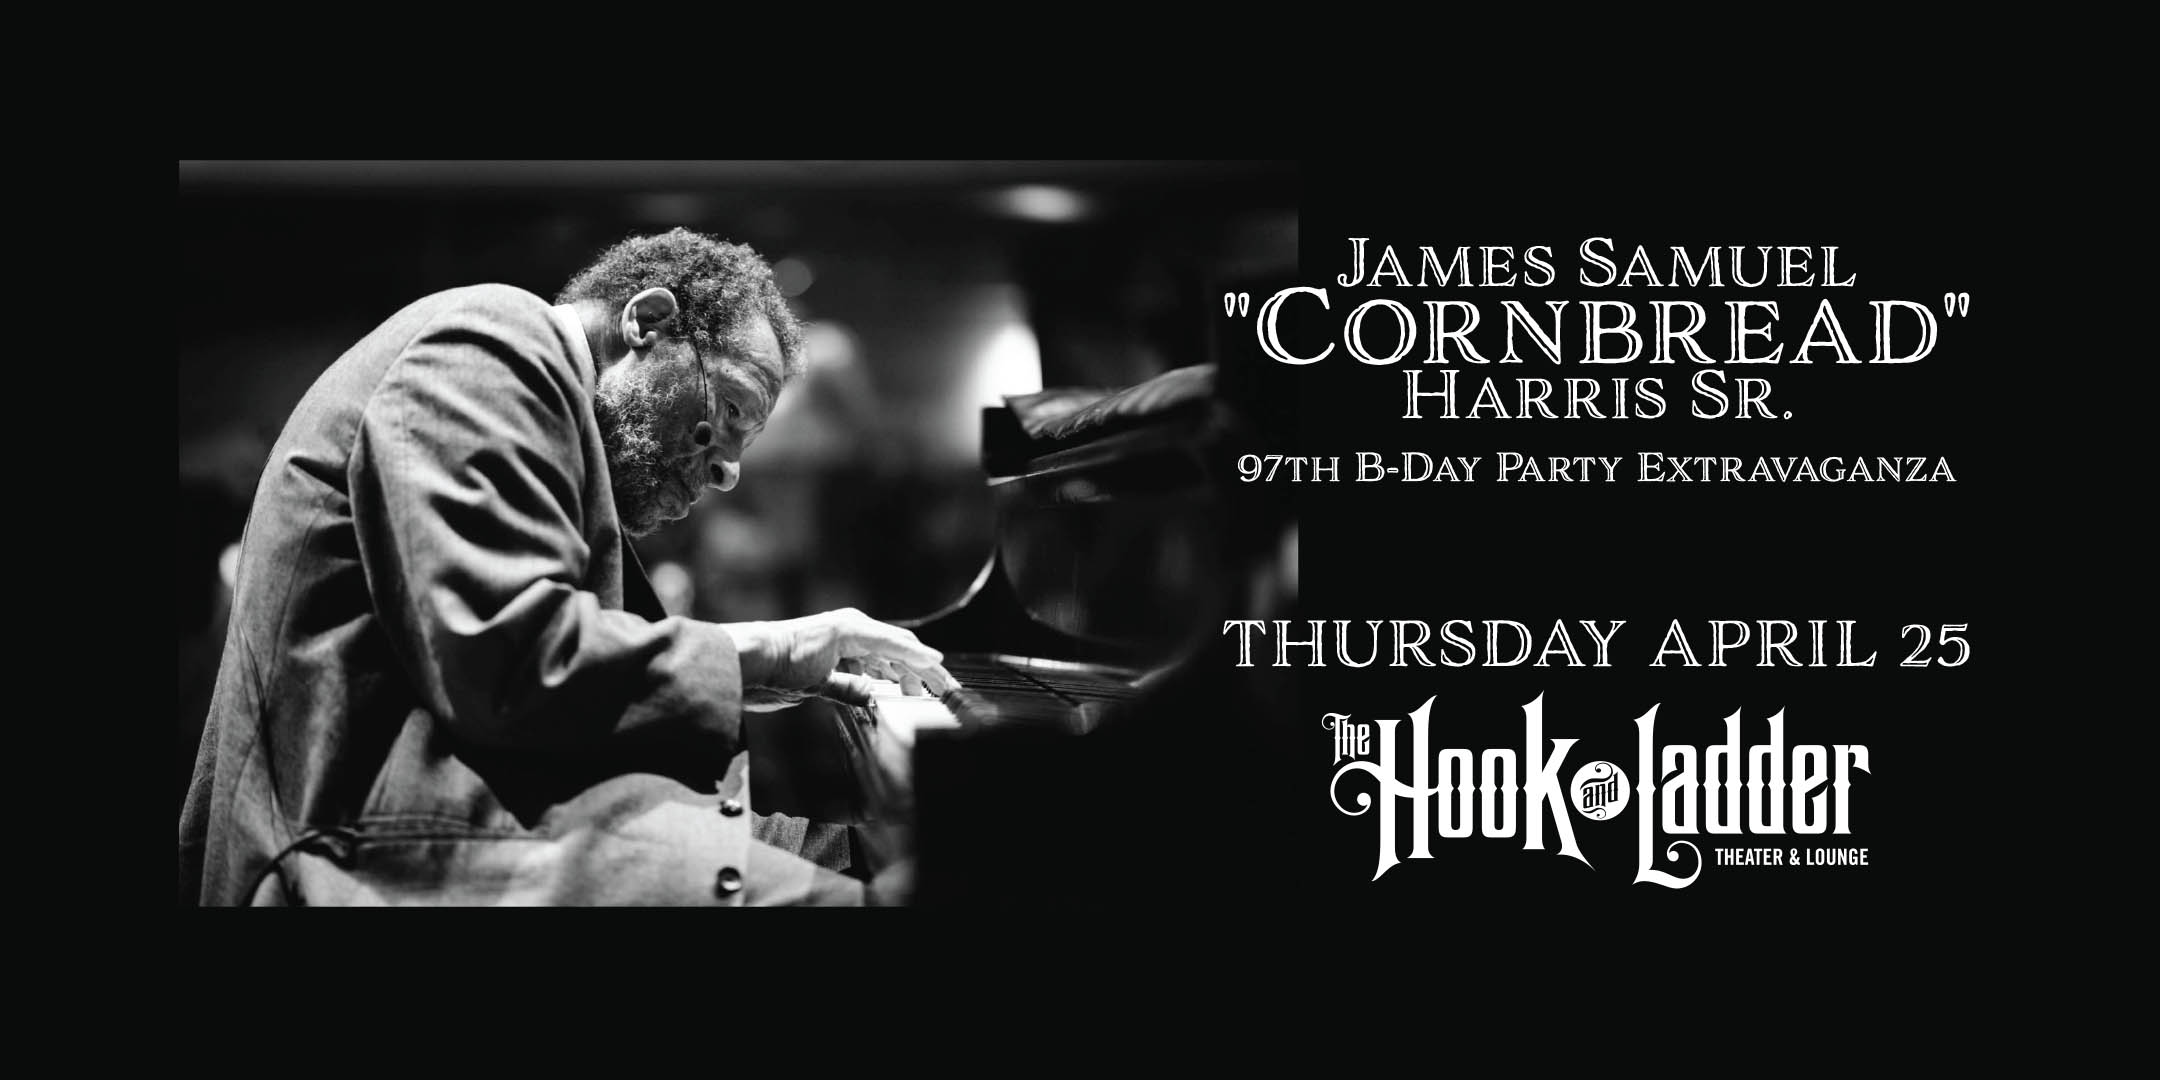 Roots, Rock, Deep Blues Presents James Samuel "Cornbread" Harris Sr. Cornbread's 97th B-Day Party Extravaganza Thursday, April 25 The Hook and Ladder Theater Doors 6:00pm :: Music 7:00pm :: 21+ Reserved Seats: $25 GA: $15 ADV / $20 DOS